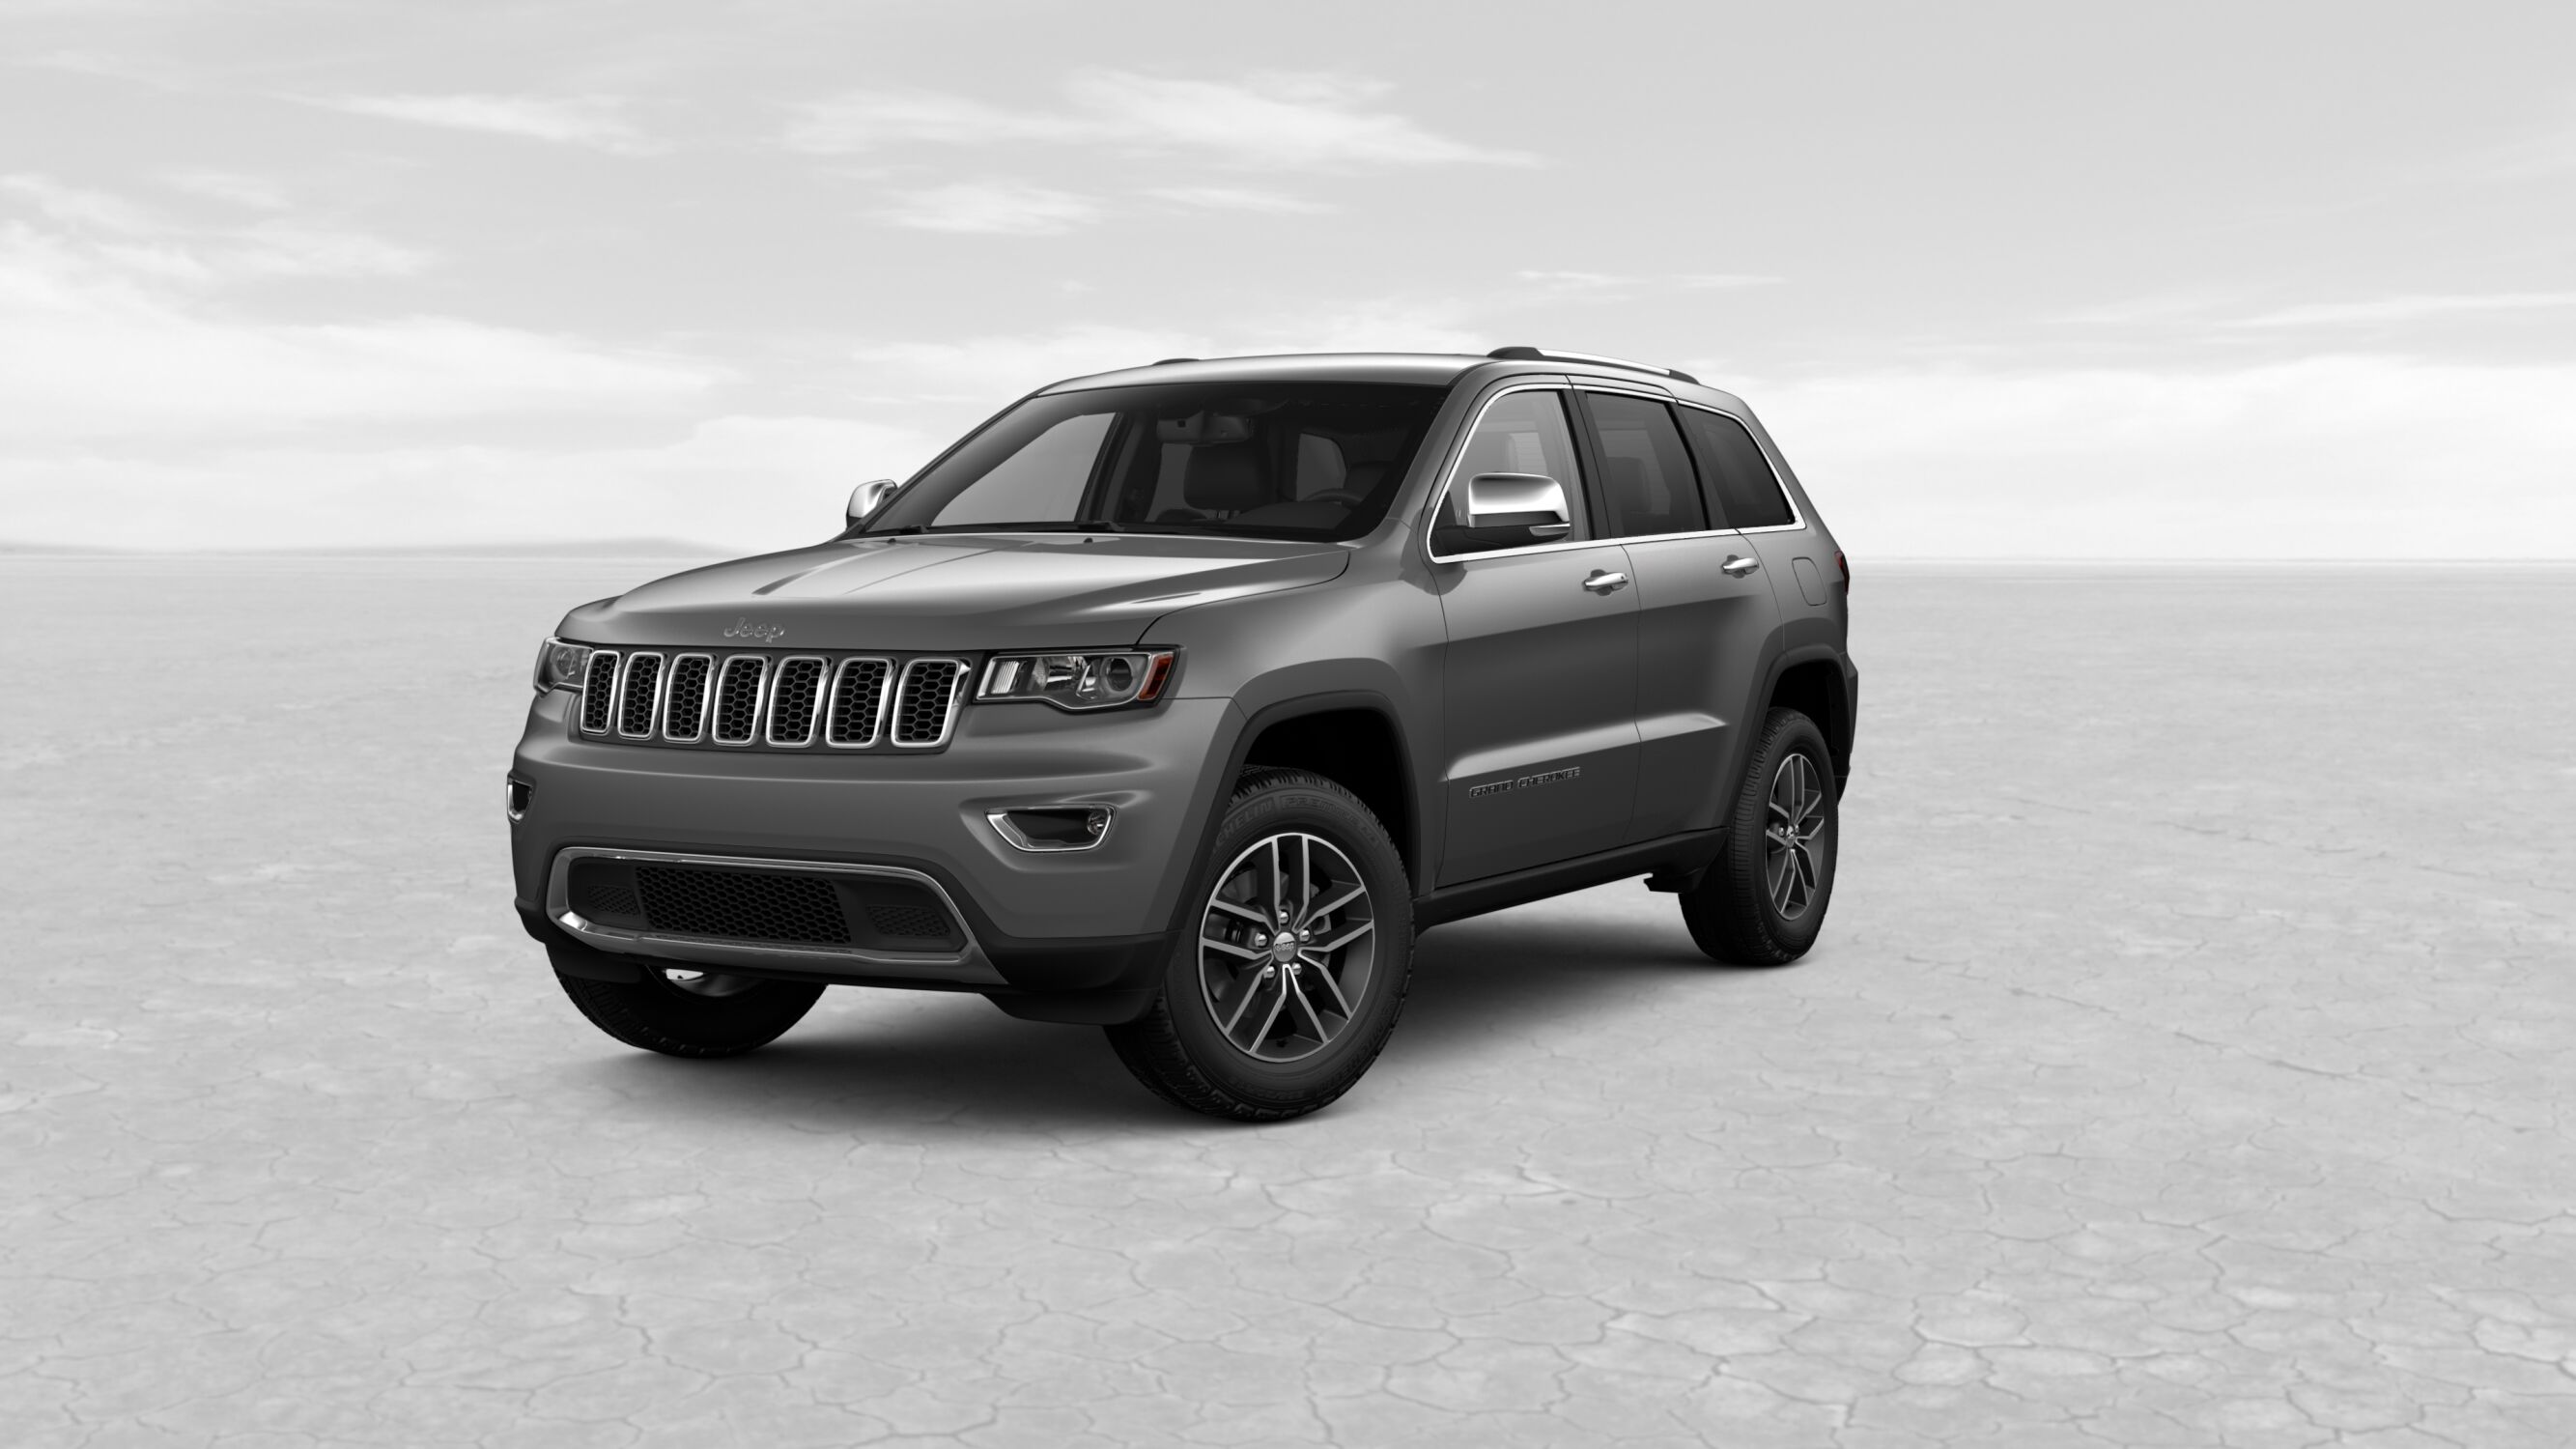 2018 Jeep Grand Chreokee Limited Granite Crystal Metallic Exterior Front View